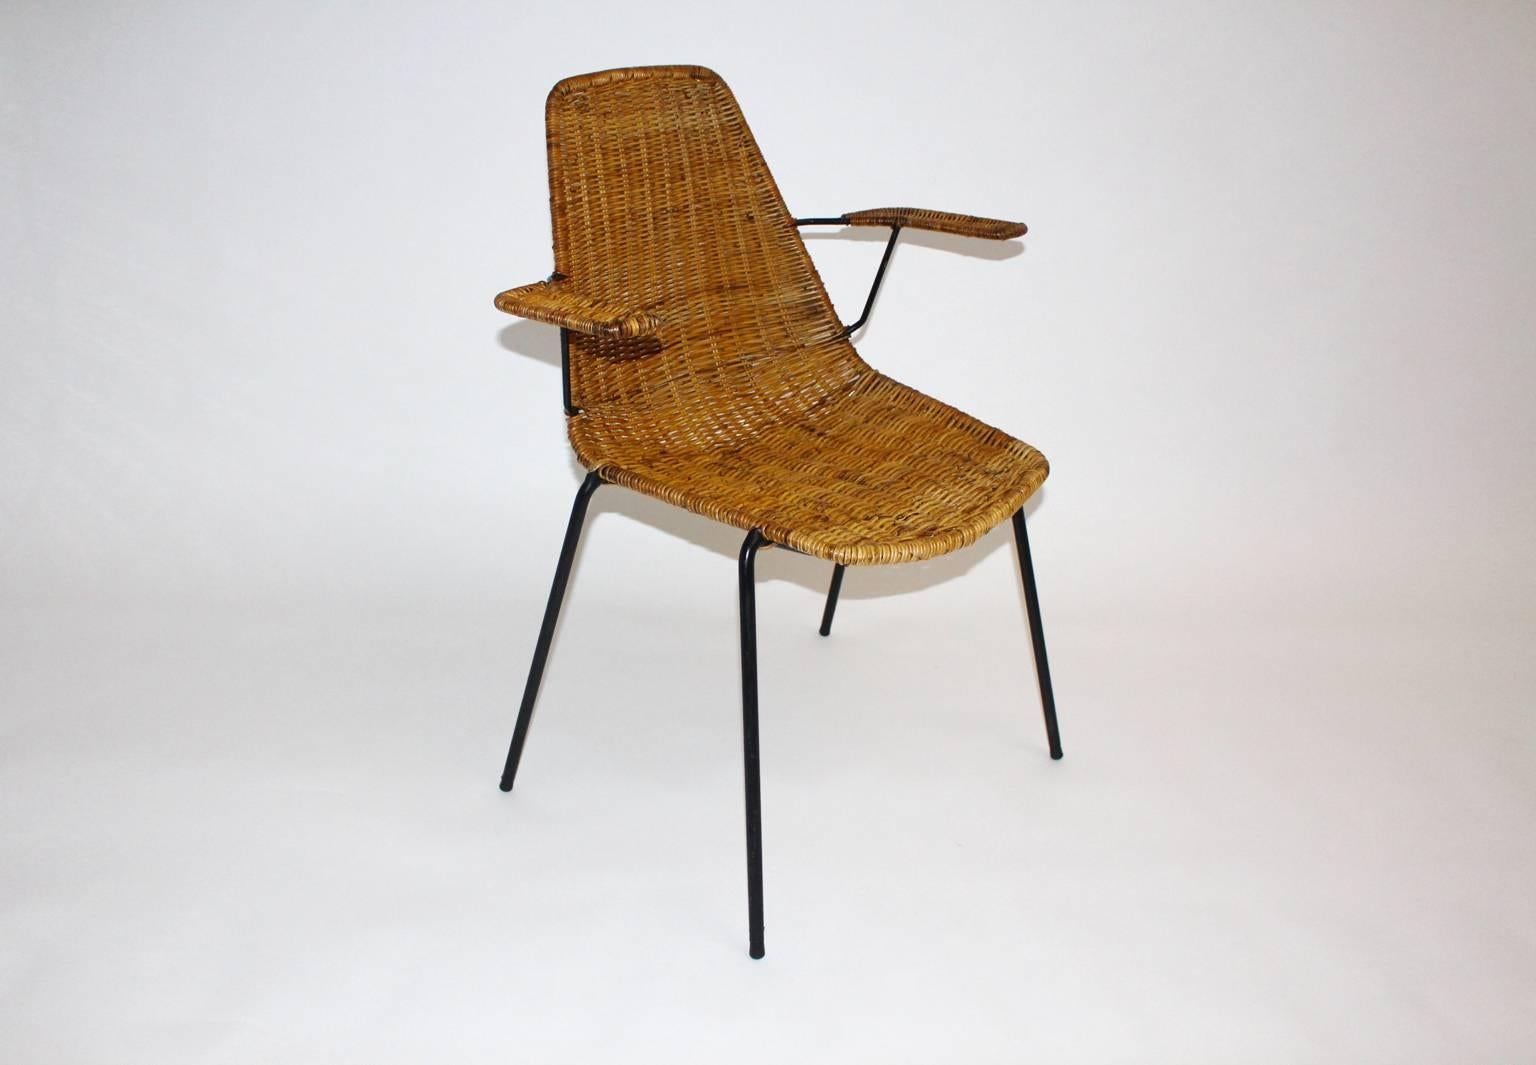 This armchair was designed by Gian Franco Legler, 1951, Switzerland, for an Italian restaurant called The Basket.
This design piece was honored with the Good Design Award from MoMA, New York;

The armchair is designed and executed in the Mid-Century